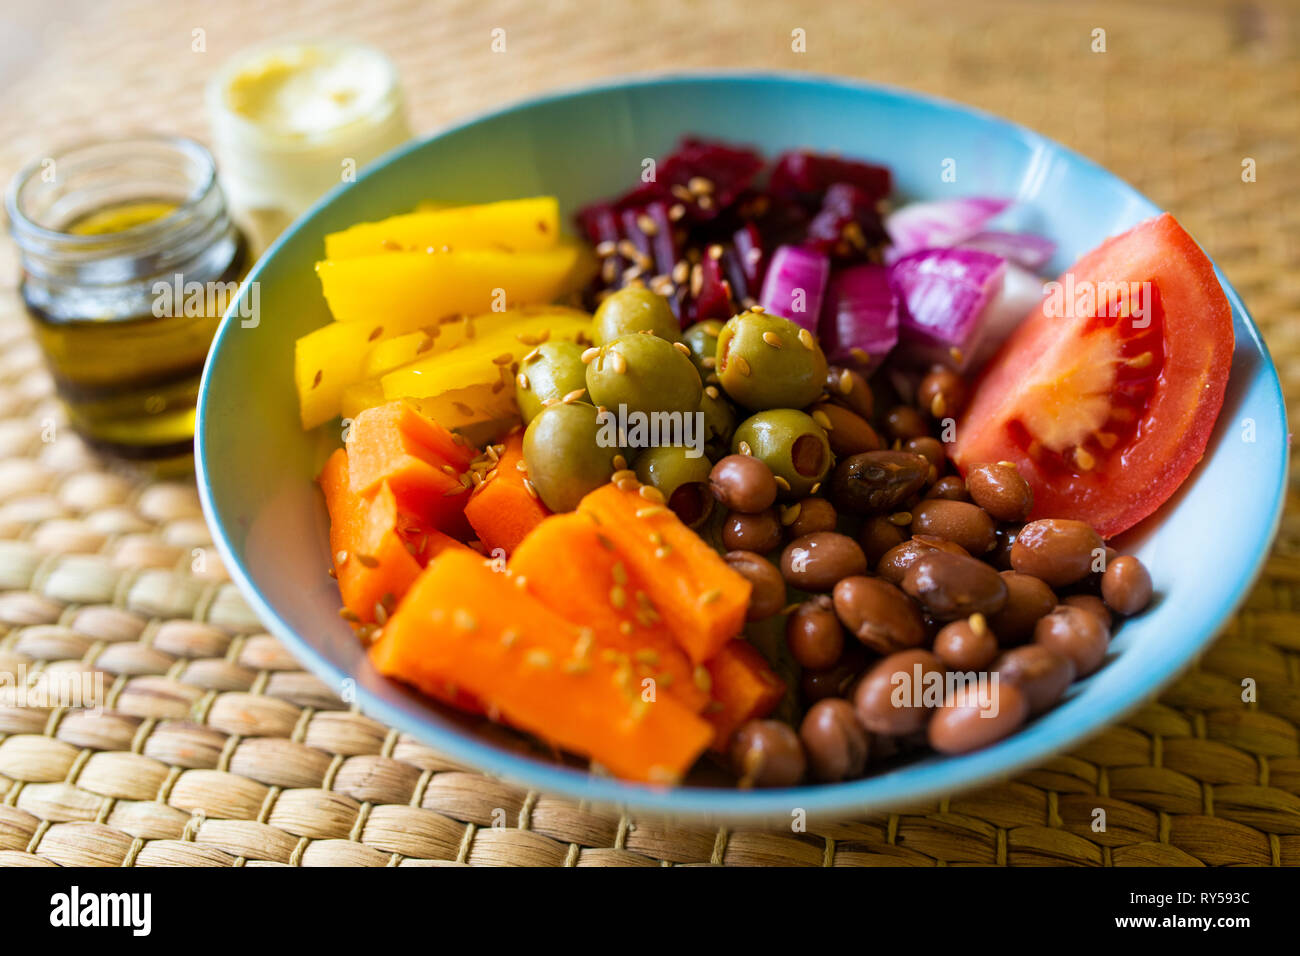 A vibrant vegan buddha bowl filled with colourful vegetables and pulses. Veganism. Veganuary Stock Photo